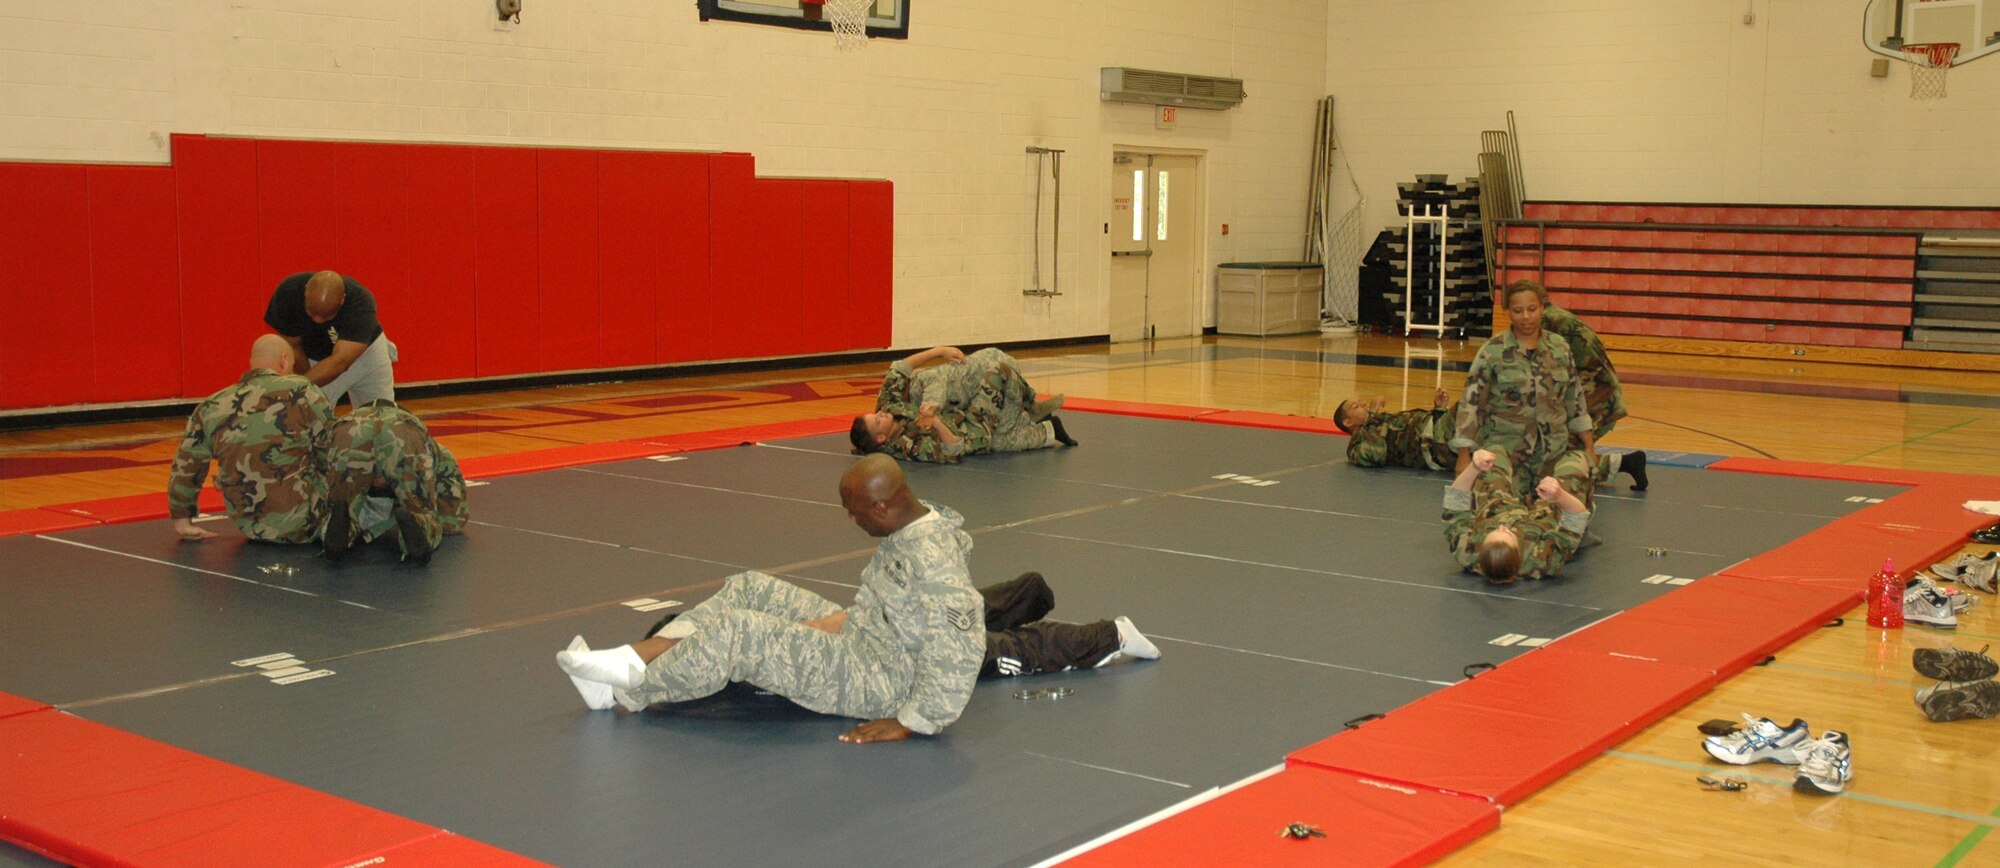 Patrolmen from the 325th Security Forces Squadron practice techniques during a self defense course at the base fitness center Friday.  Carlos Cummings, martial arts instructor and owner of Cummings Combat Sambo was teaching the course to the Airmen to teach them some hand-to-hand combat techniques that they can use on the job here and at deployed locations.  (U.S. Air Force photo/Staff Sgt. Timothy R. Capling)